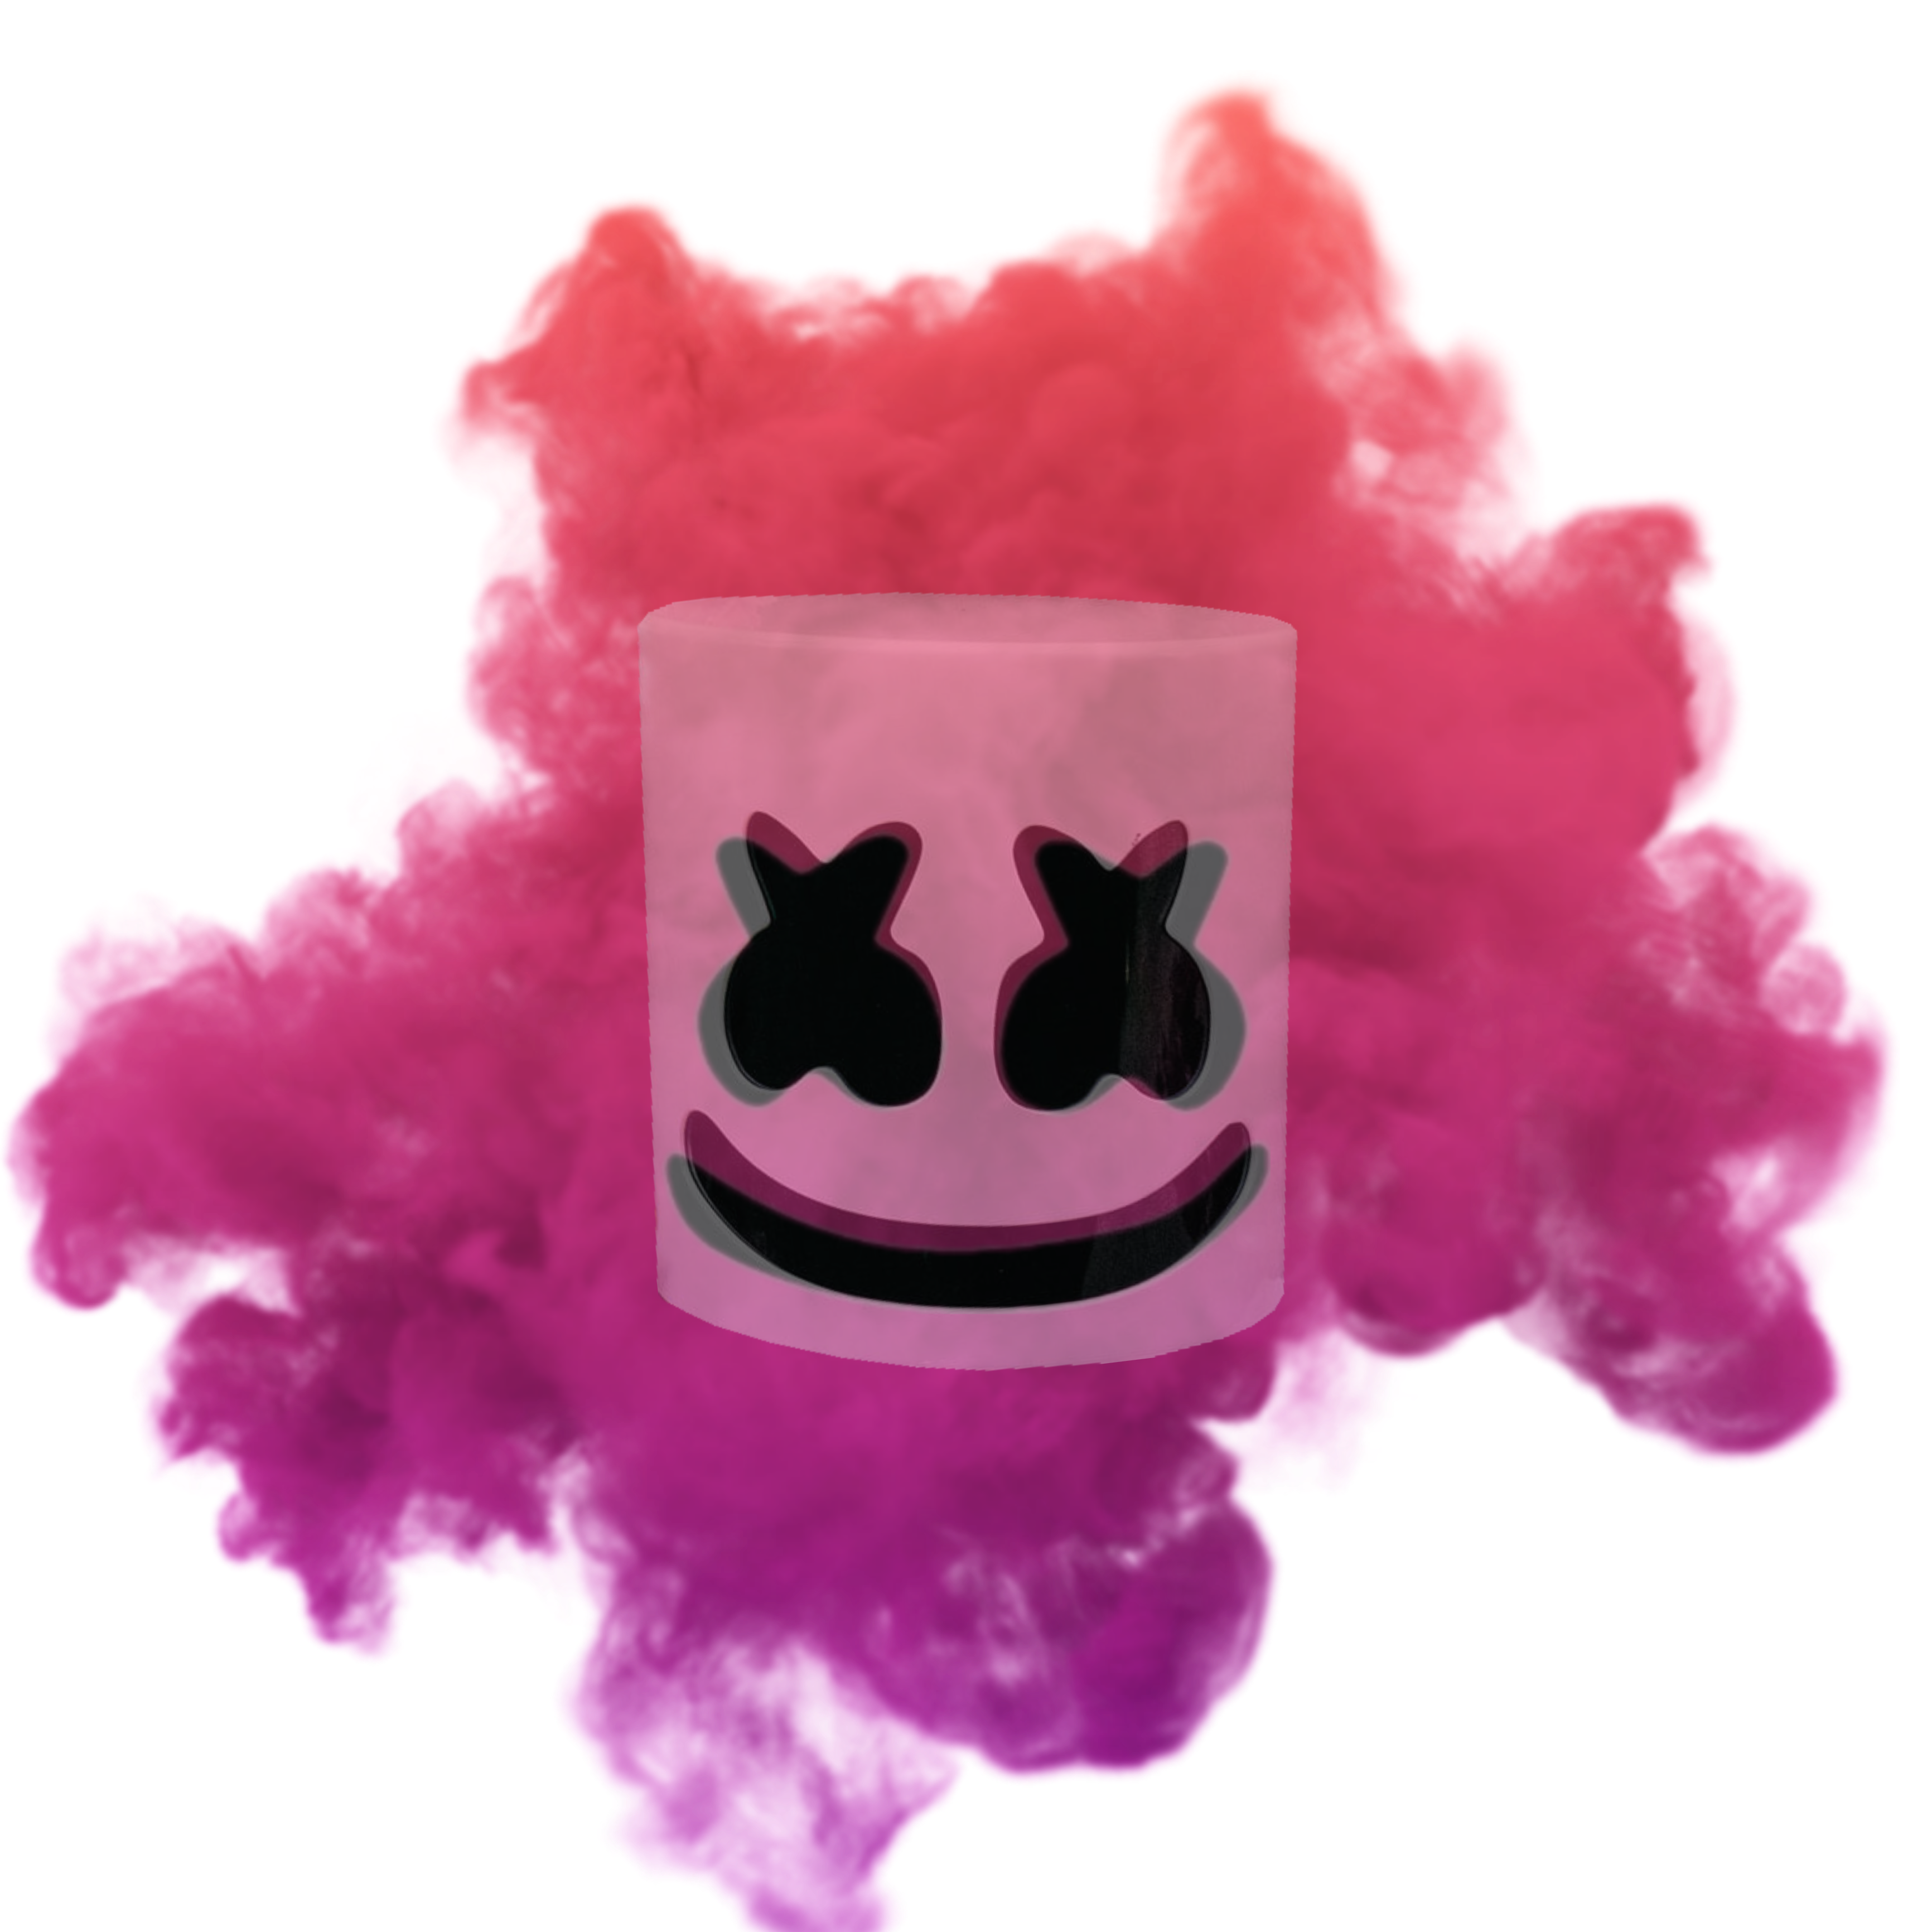 Popular and Trending marshmello Stickers on PicsArt - 240 x 240 png 115kB